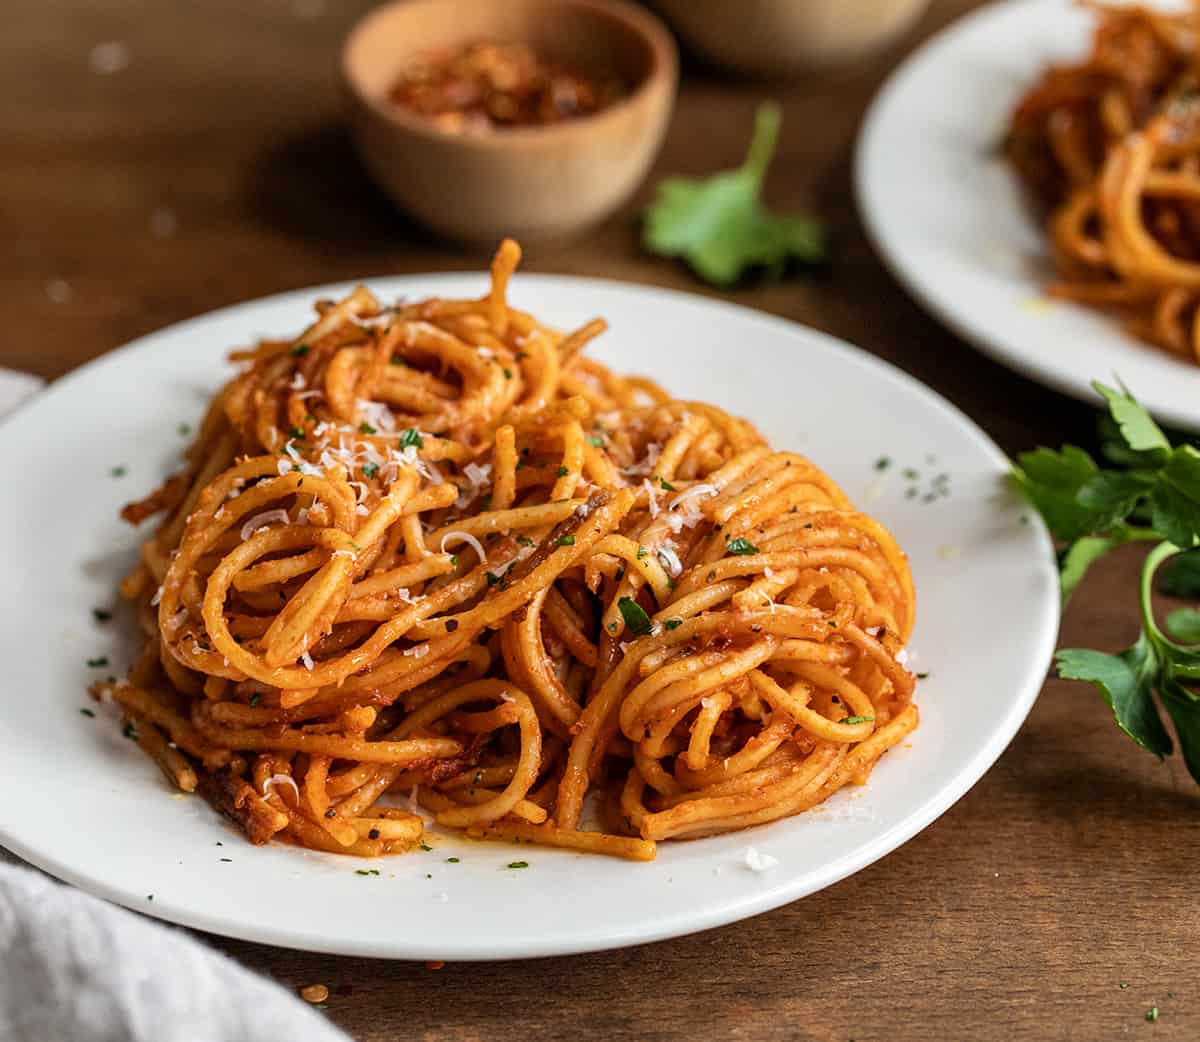 Plate of Assassin Spaghetti on wooden table.